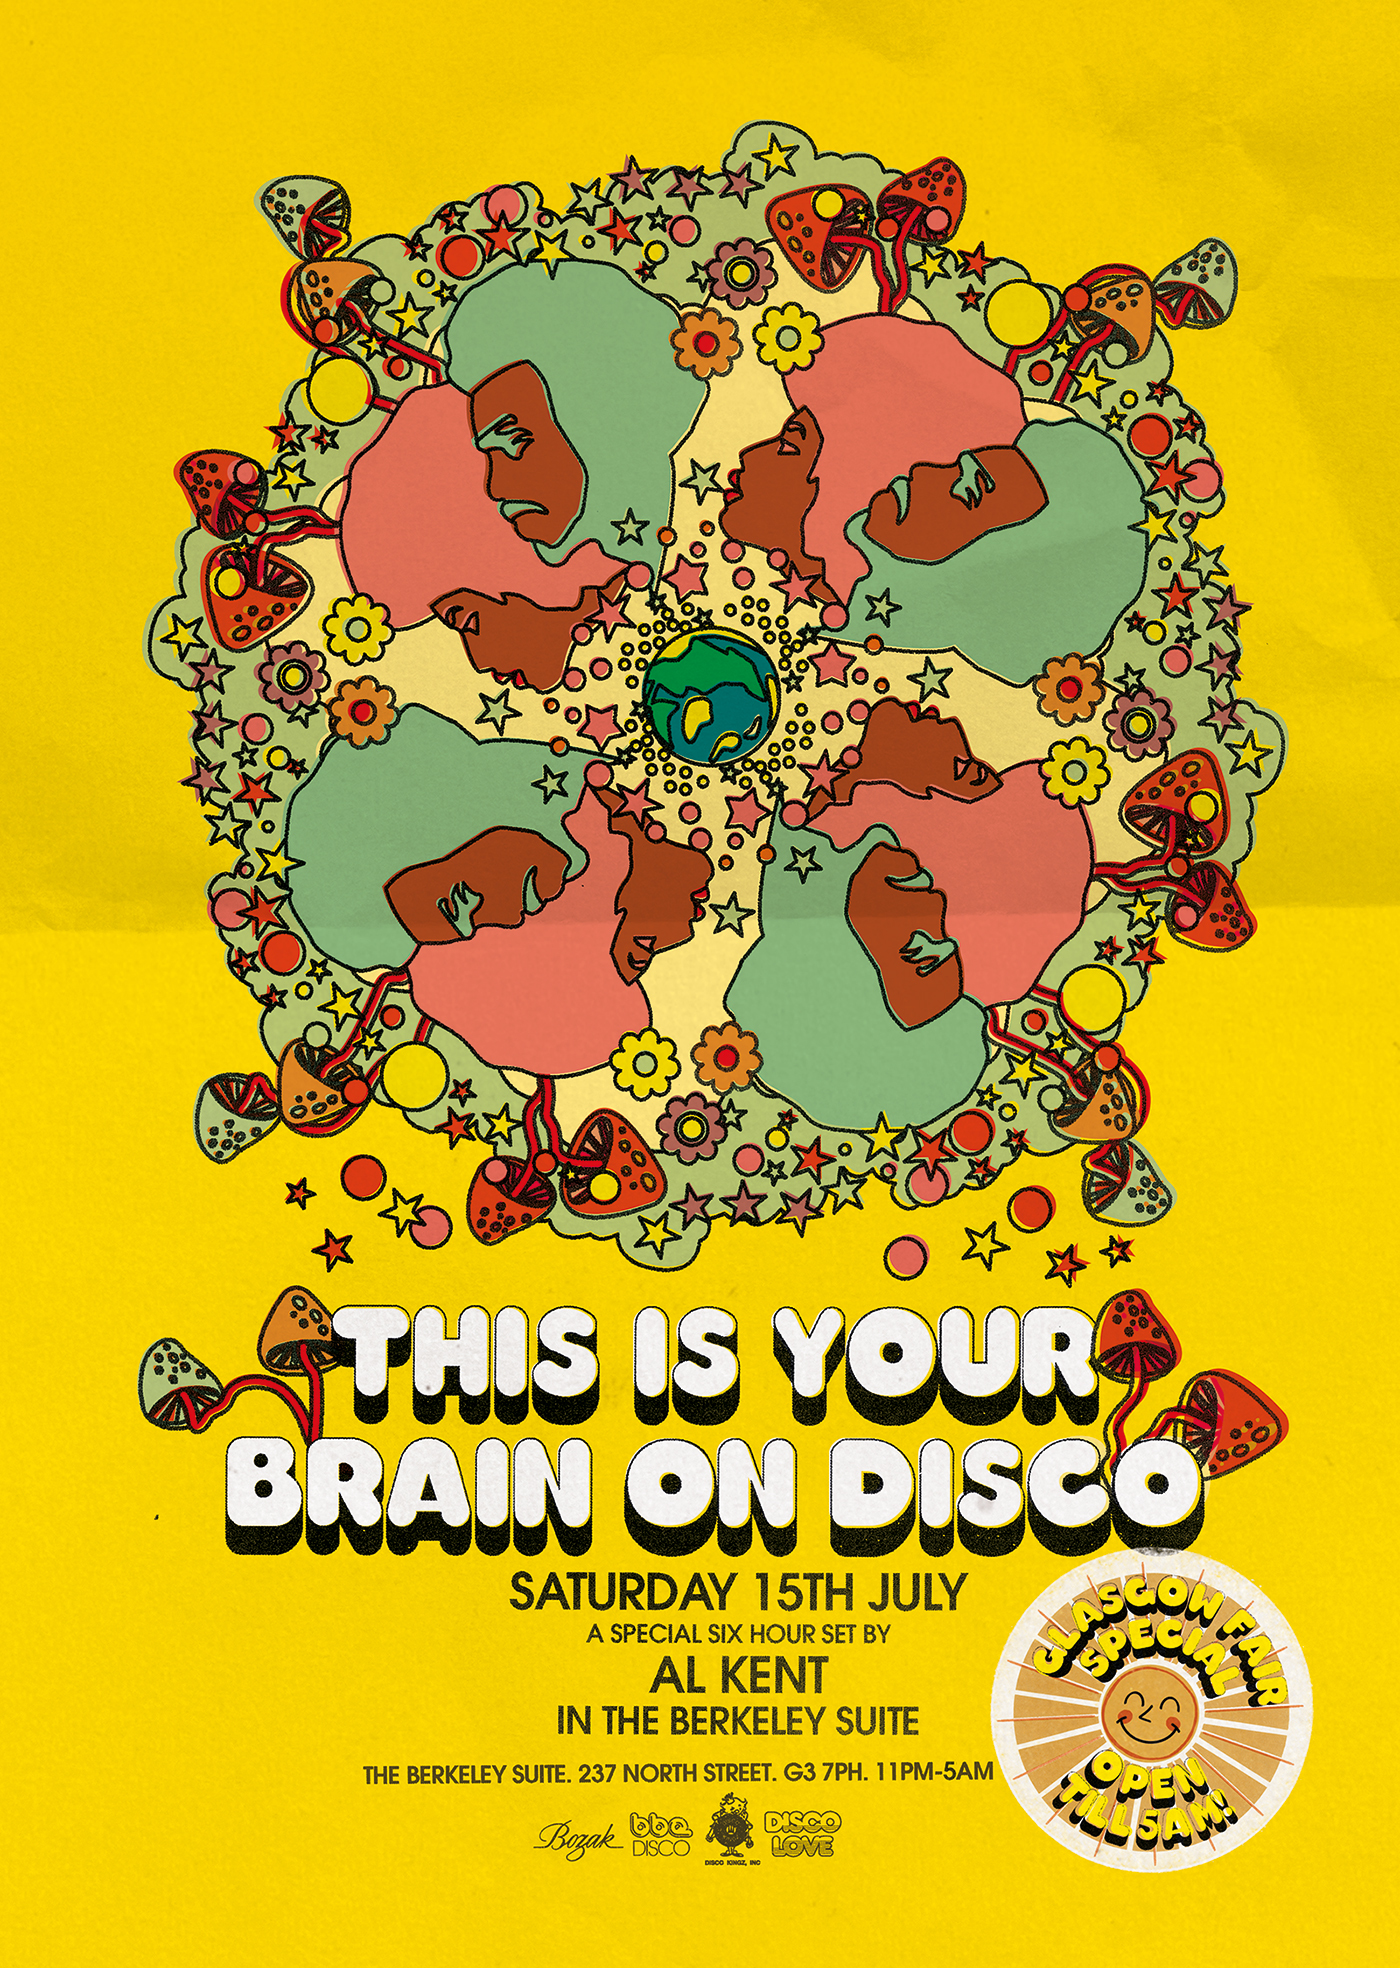 THIS IS YOUR BRAIN ON DISCO!